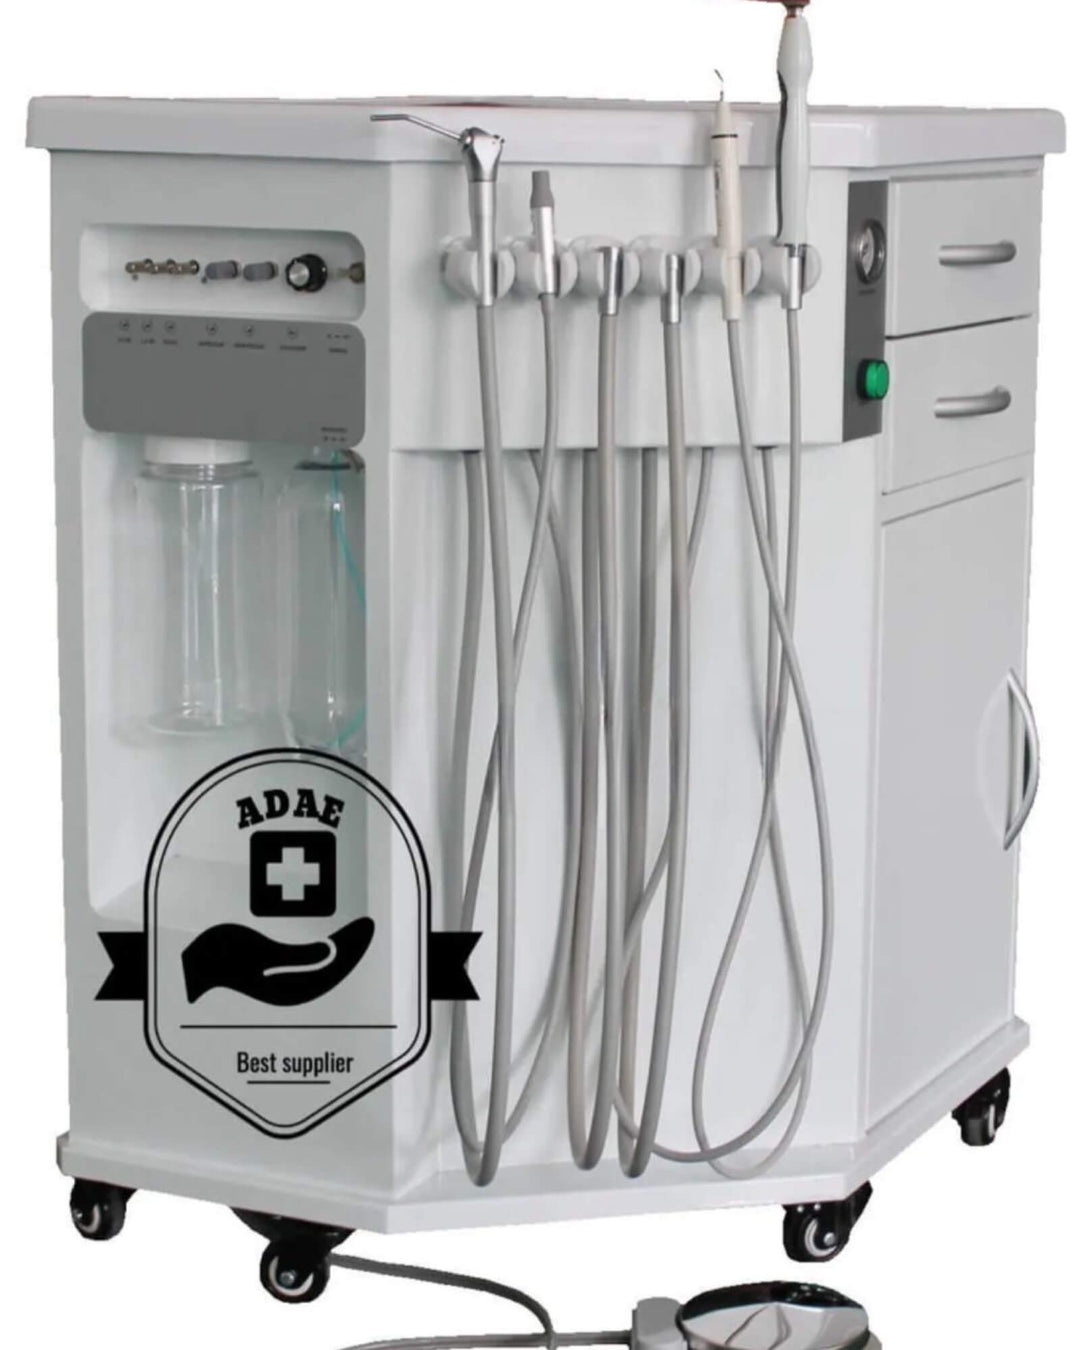 ADAE A90 portable dental unit with cabinet and built-in silent air compressor